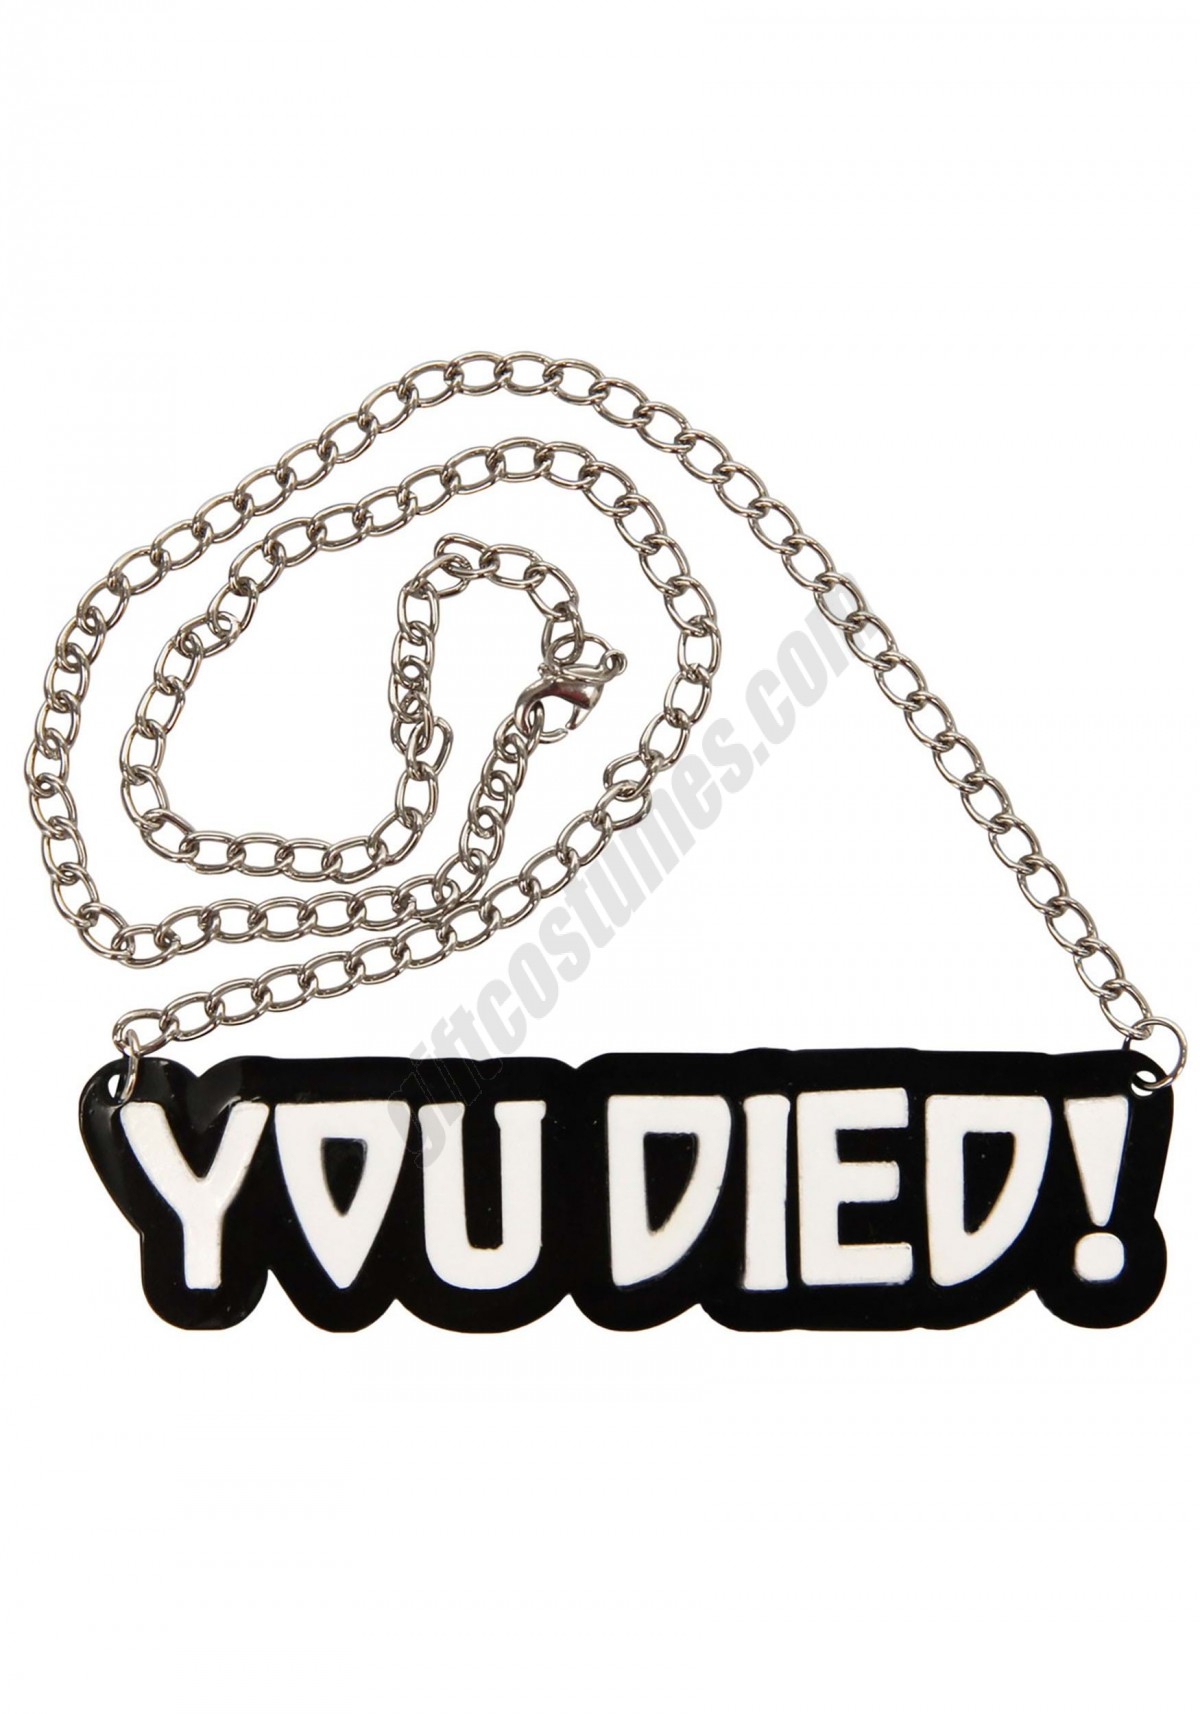 Necklace  You Died! Necklace  Promotions - -0